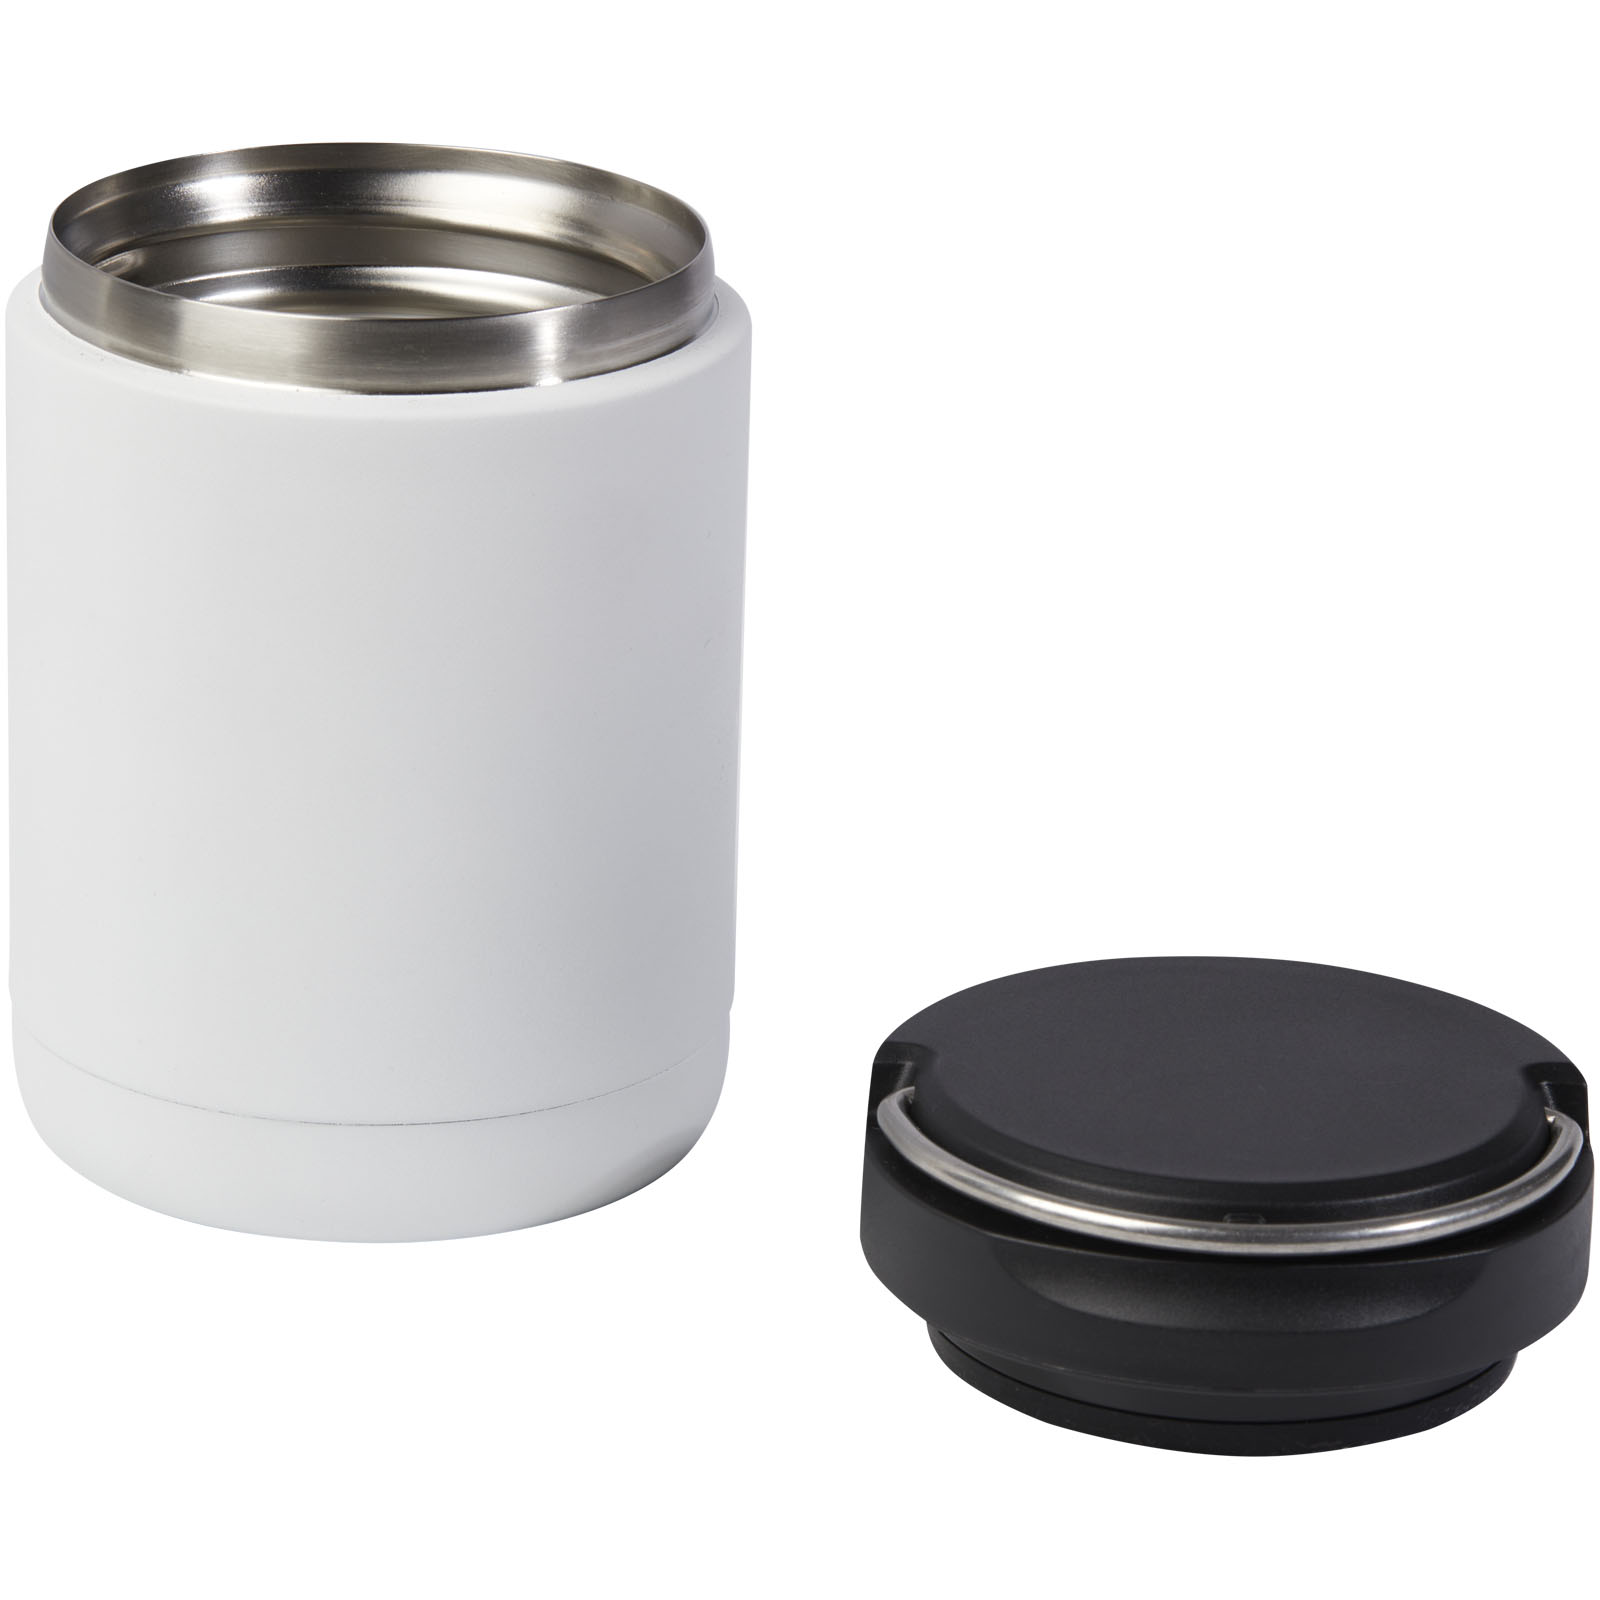 Advertising Lunch Boxes - Doveron 500 ml recycled stainless steel insulated lunch pot - 4